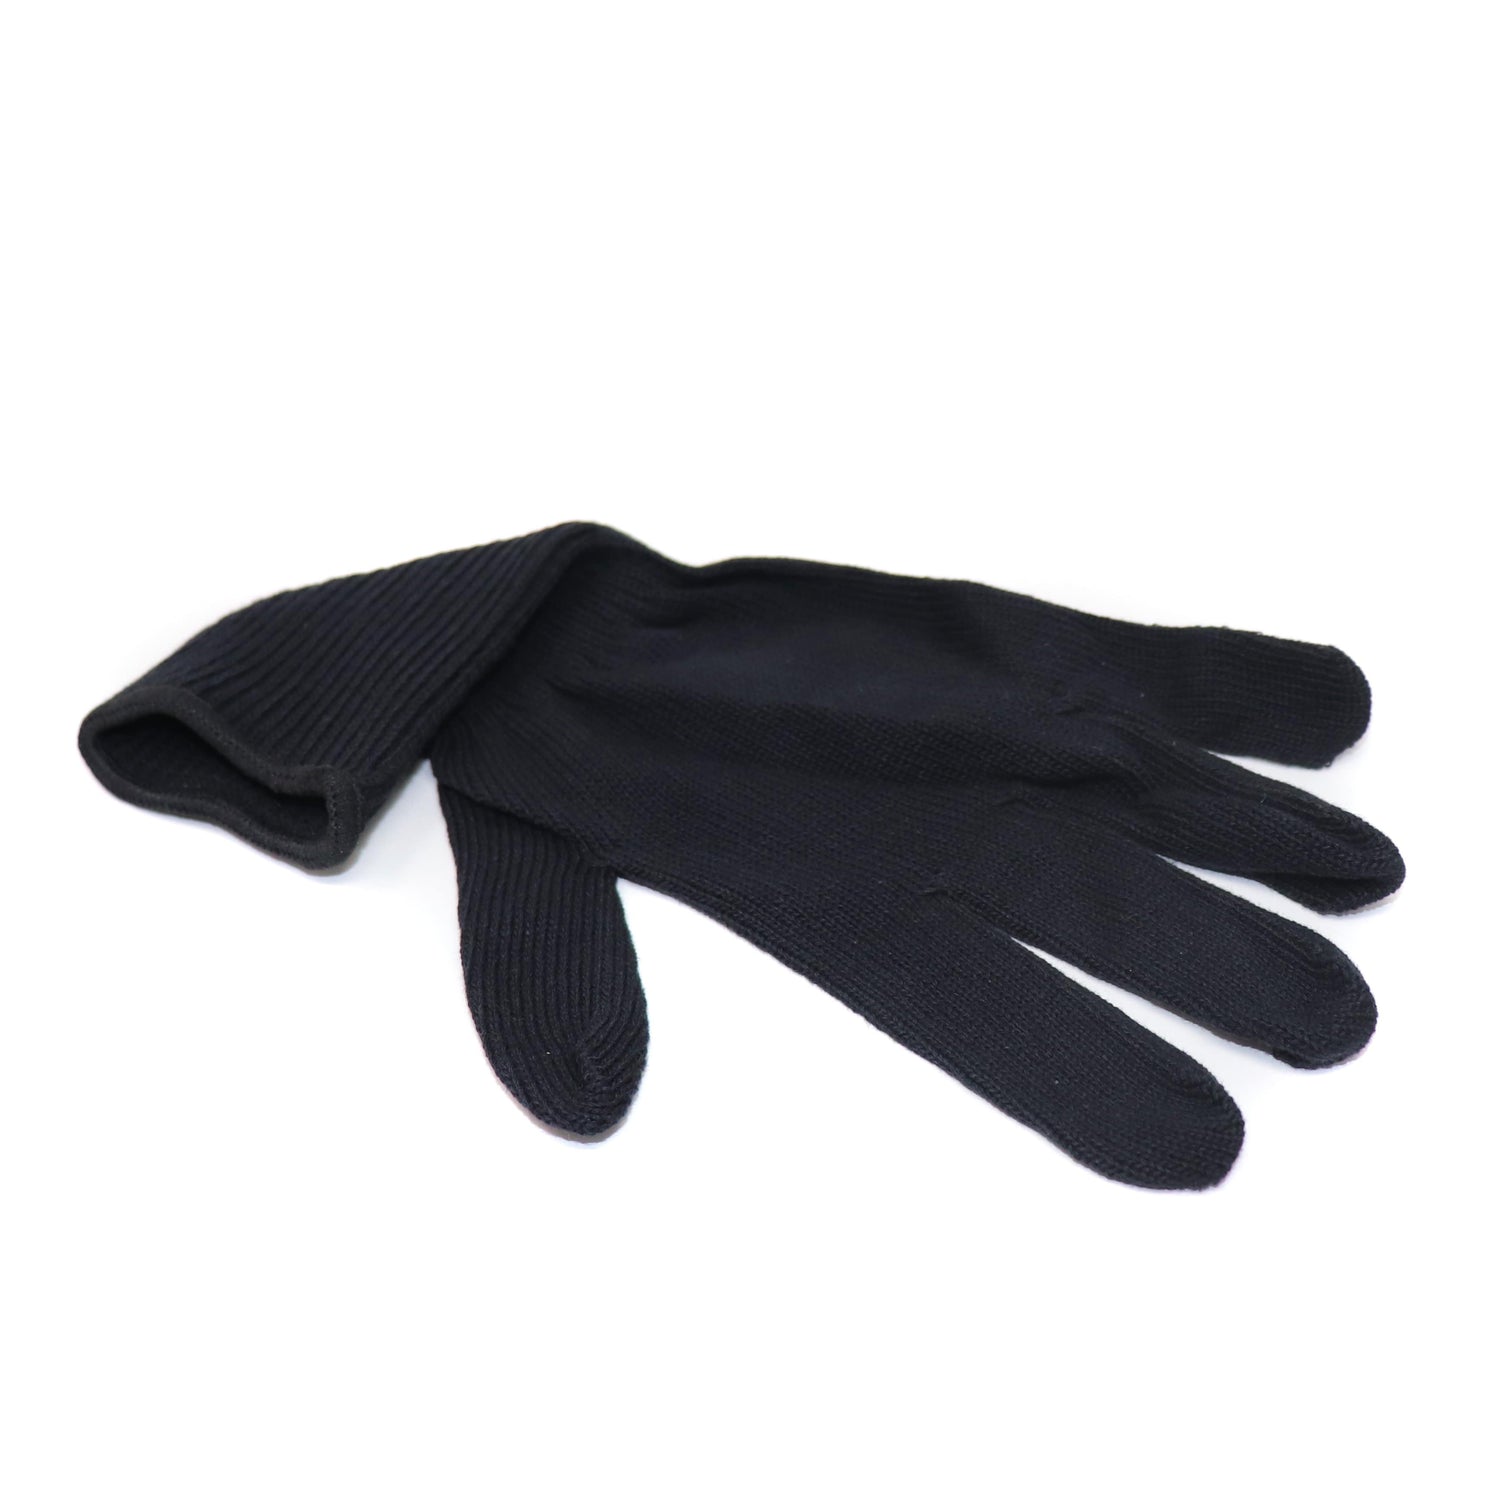 Heat Resistant Glove For Hair Styling